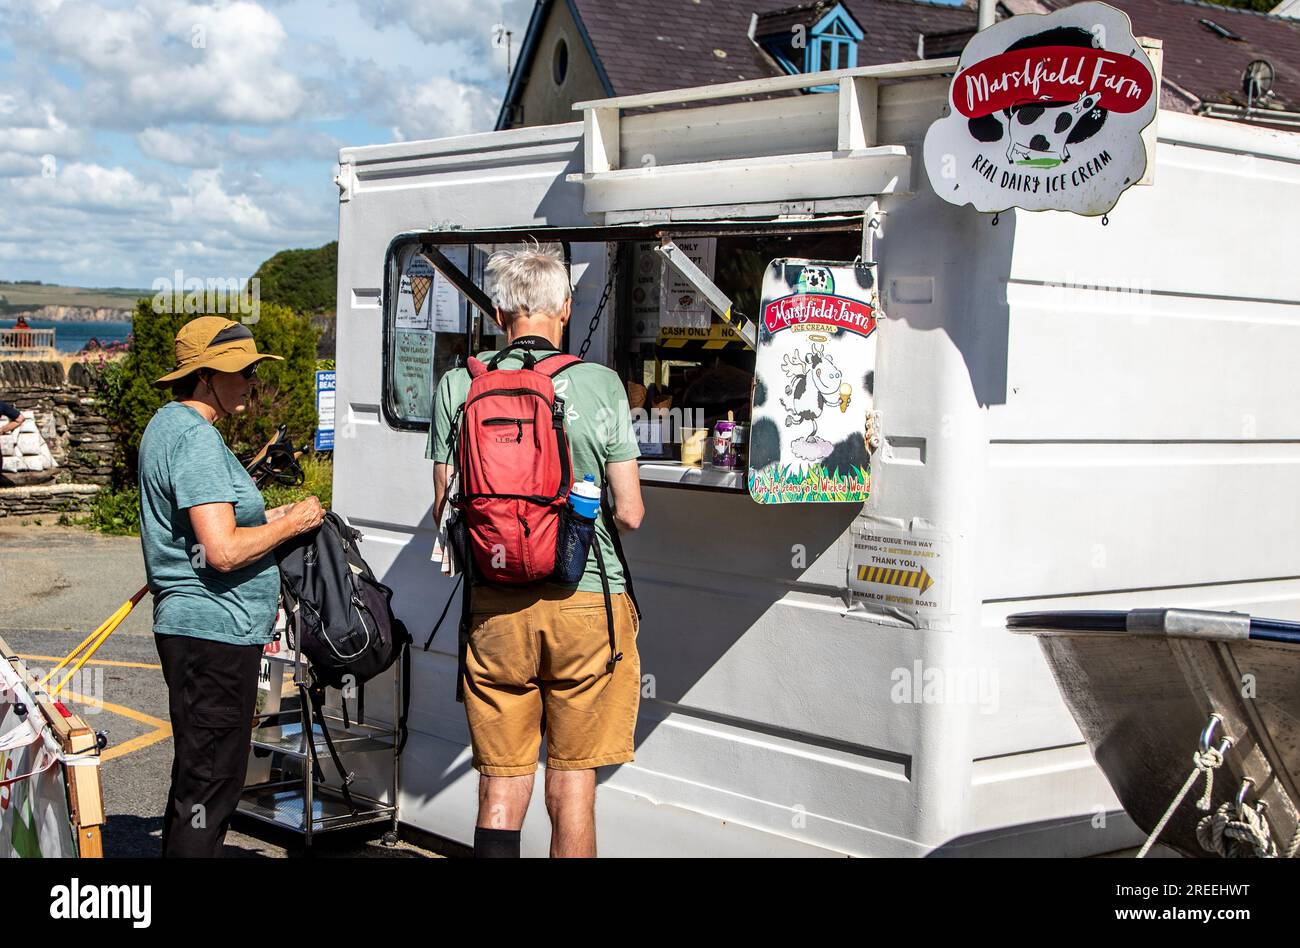 Tourists Buying Ice creams In Cwm-Yr-Eglwys Pembrokeshire Wales UK Stock Photo